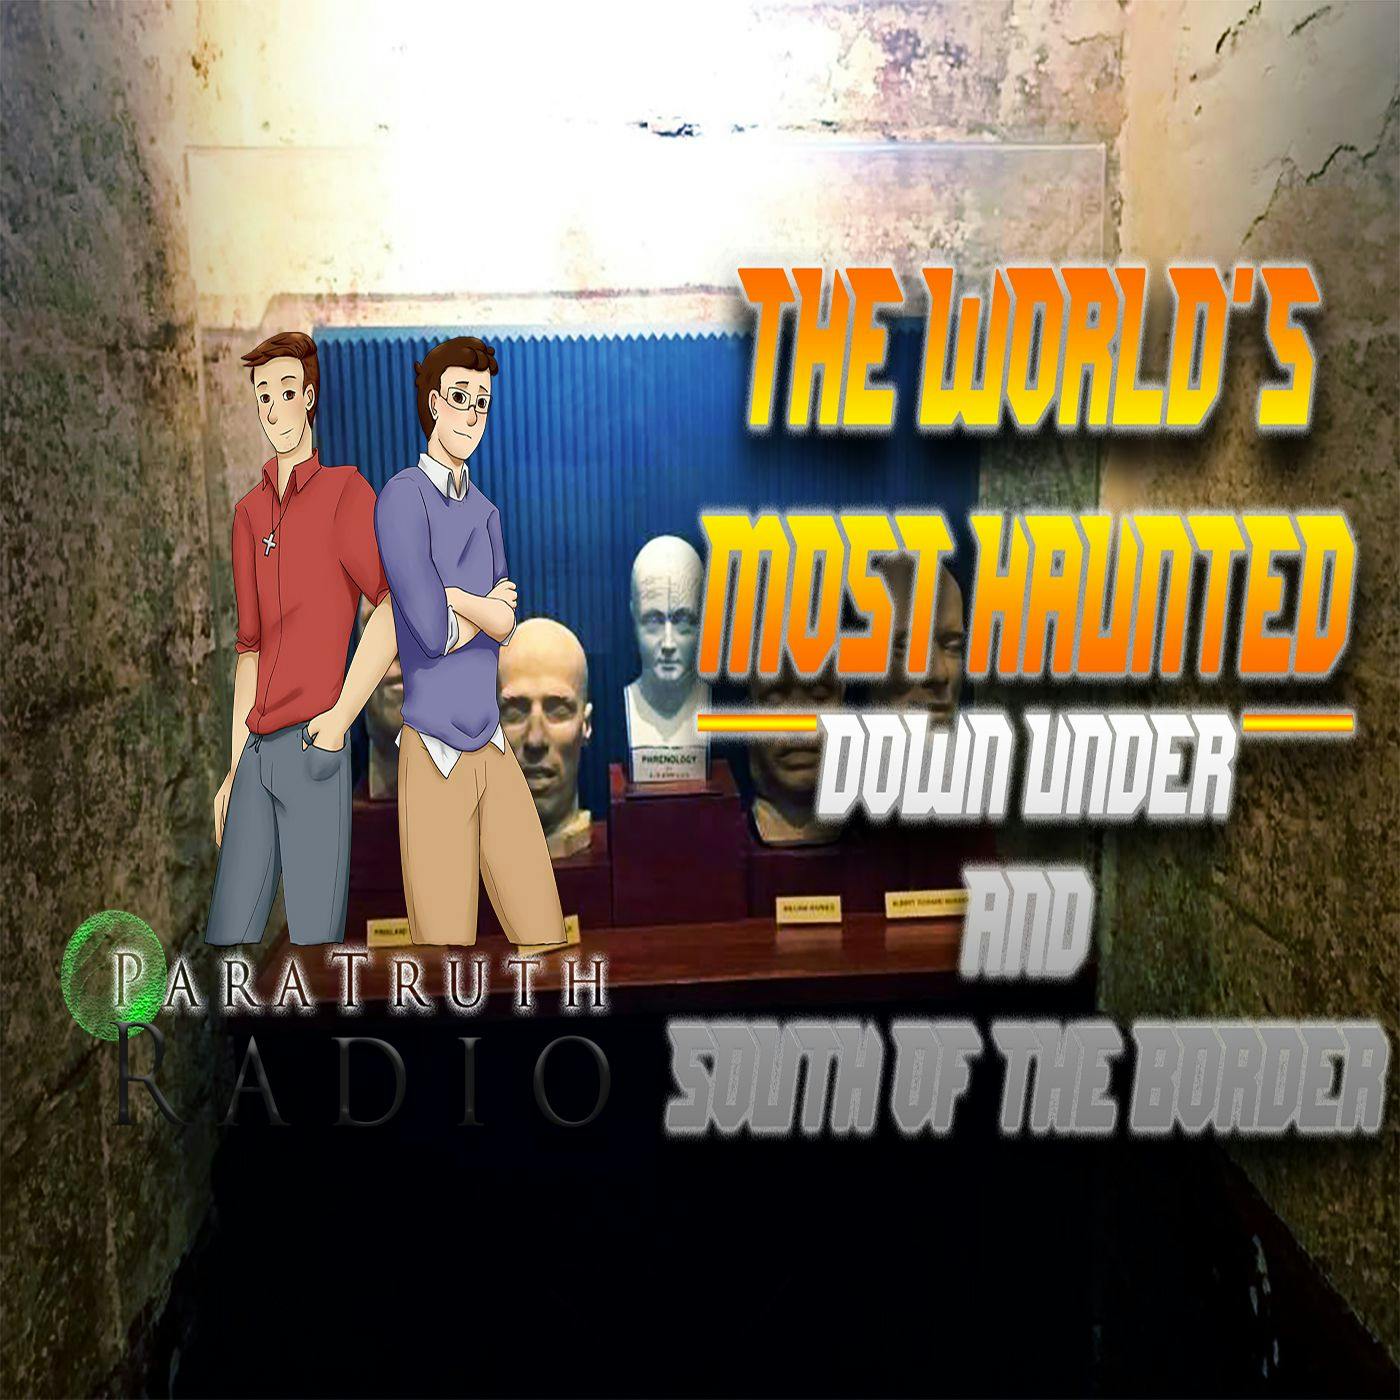 The World's Most Haunted: Down Under and South of the Border Image